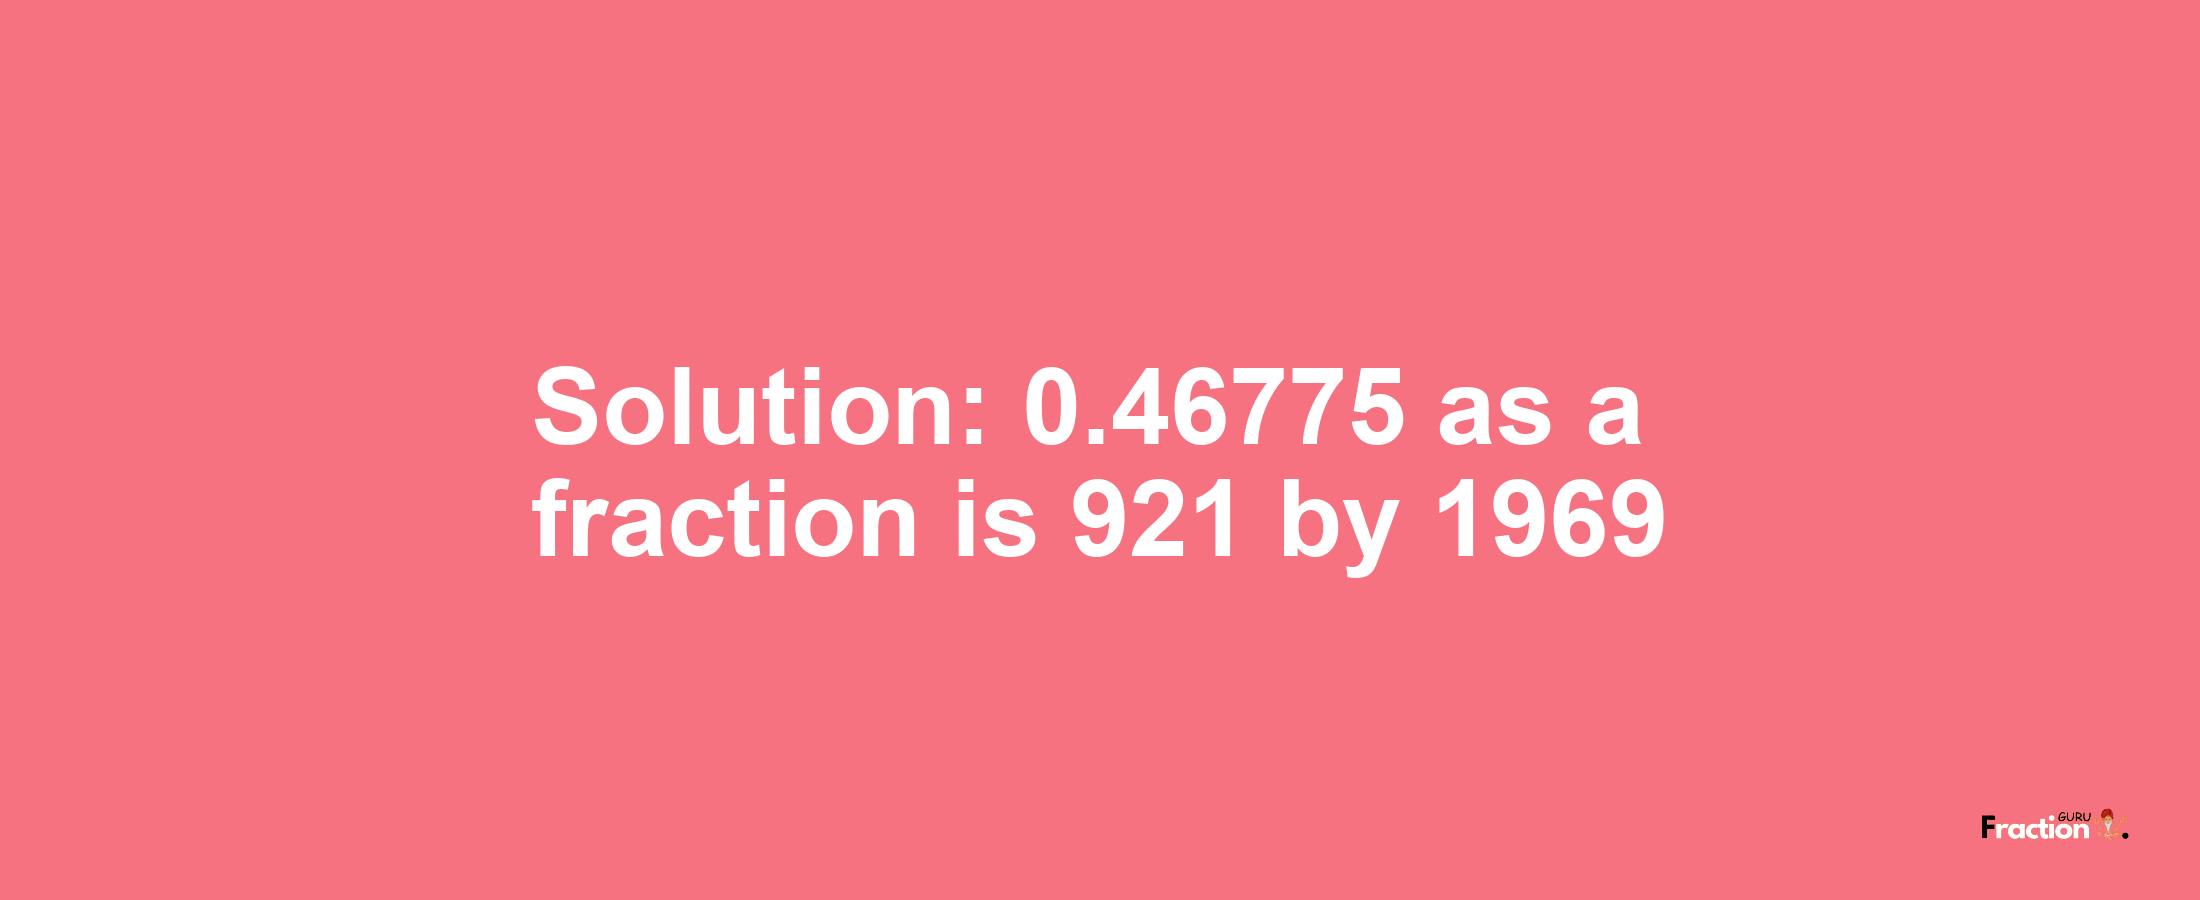 Solution:0.46775 as a fraction is 921/1969